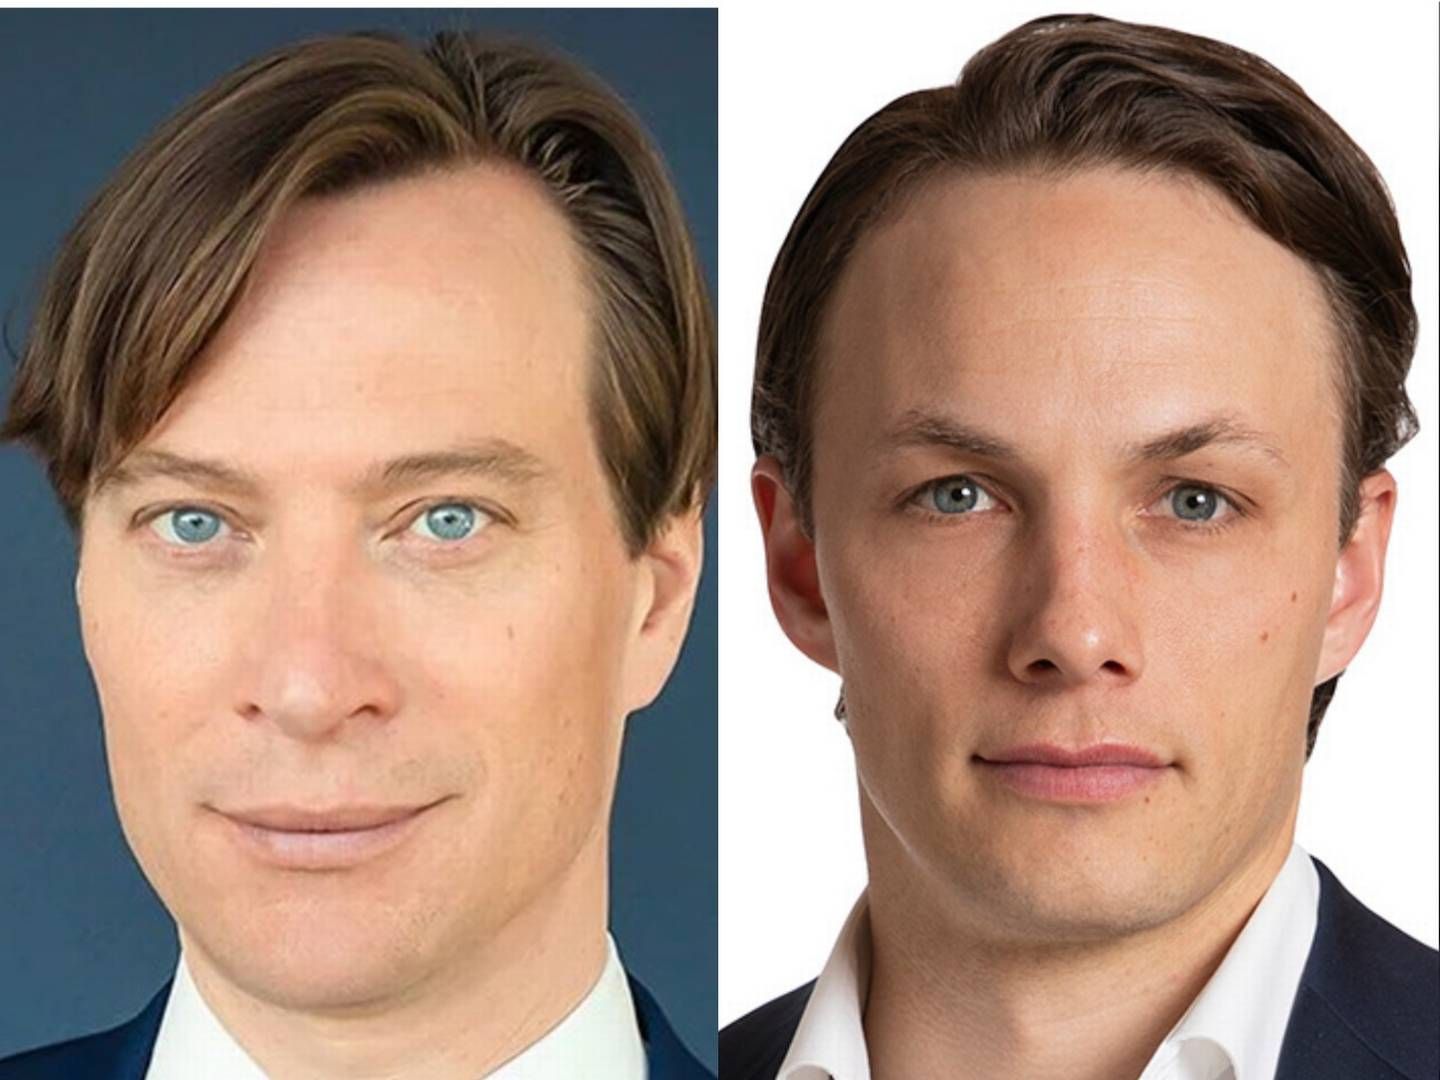 Gustaf Rentzhog, CEO and one of the founders of Söderberg & Partners, Hans Arstad, Managing Director at KKR, and Chris Parkin, Managing Director and co-head of Business Services at TA Associates. | Photo: PR / Söderberg & Partners, KKR and TA Associates.